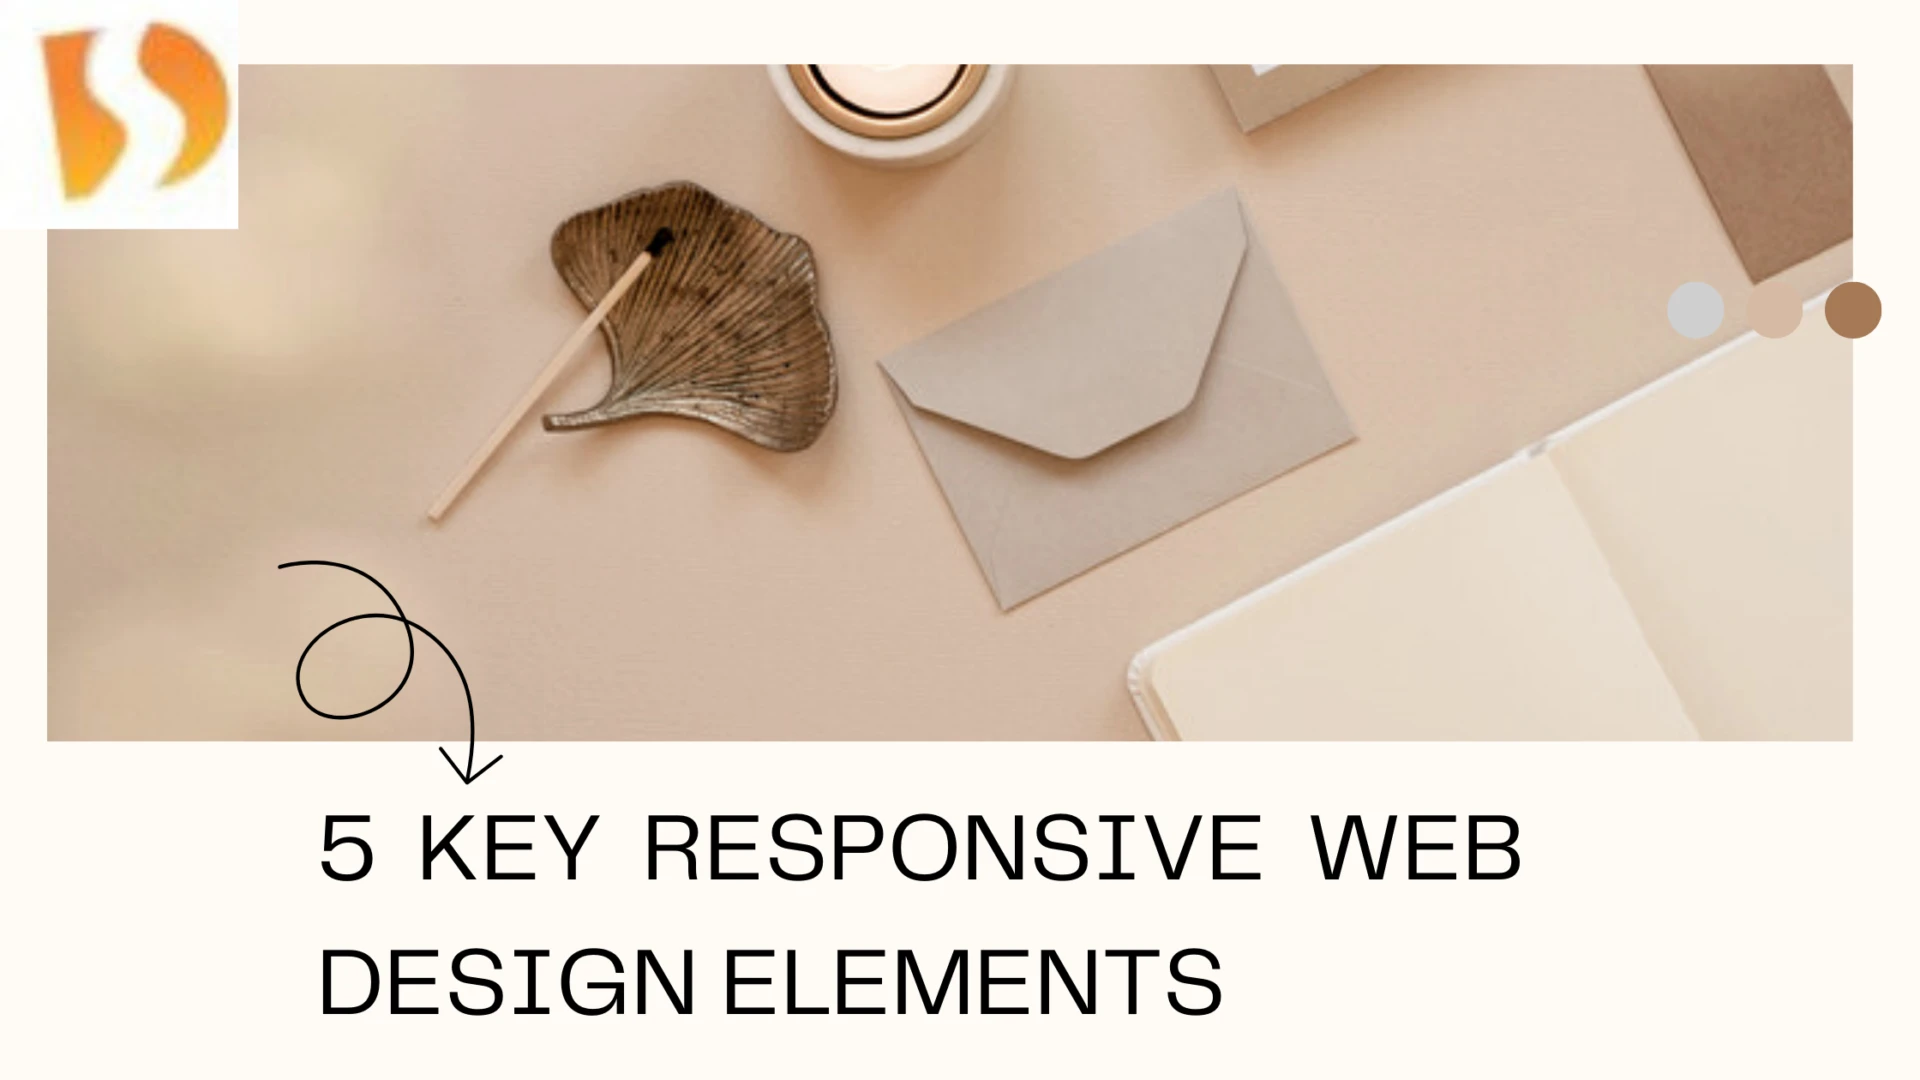 Explain me clearly about Responsive Design